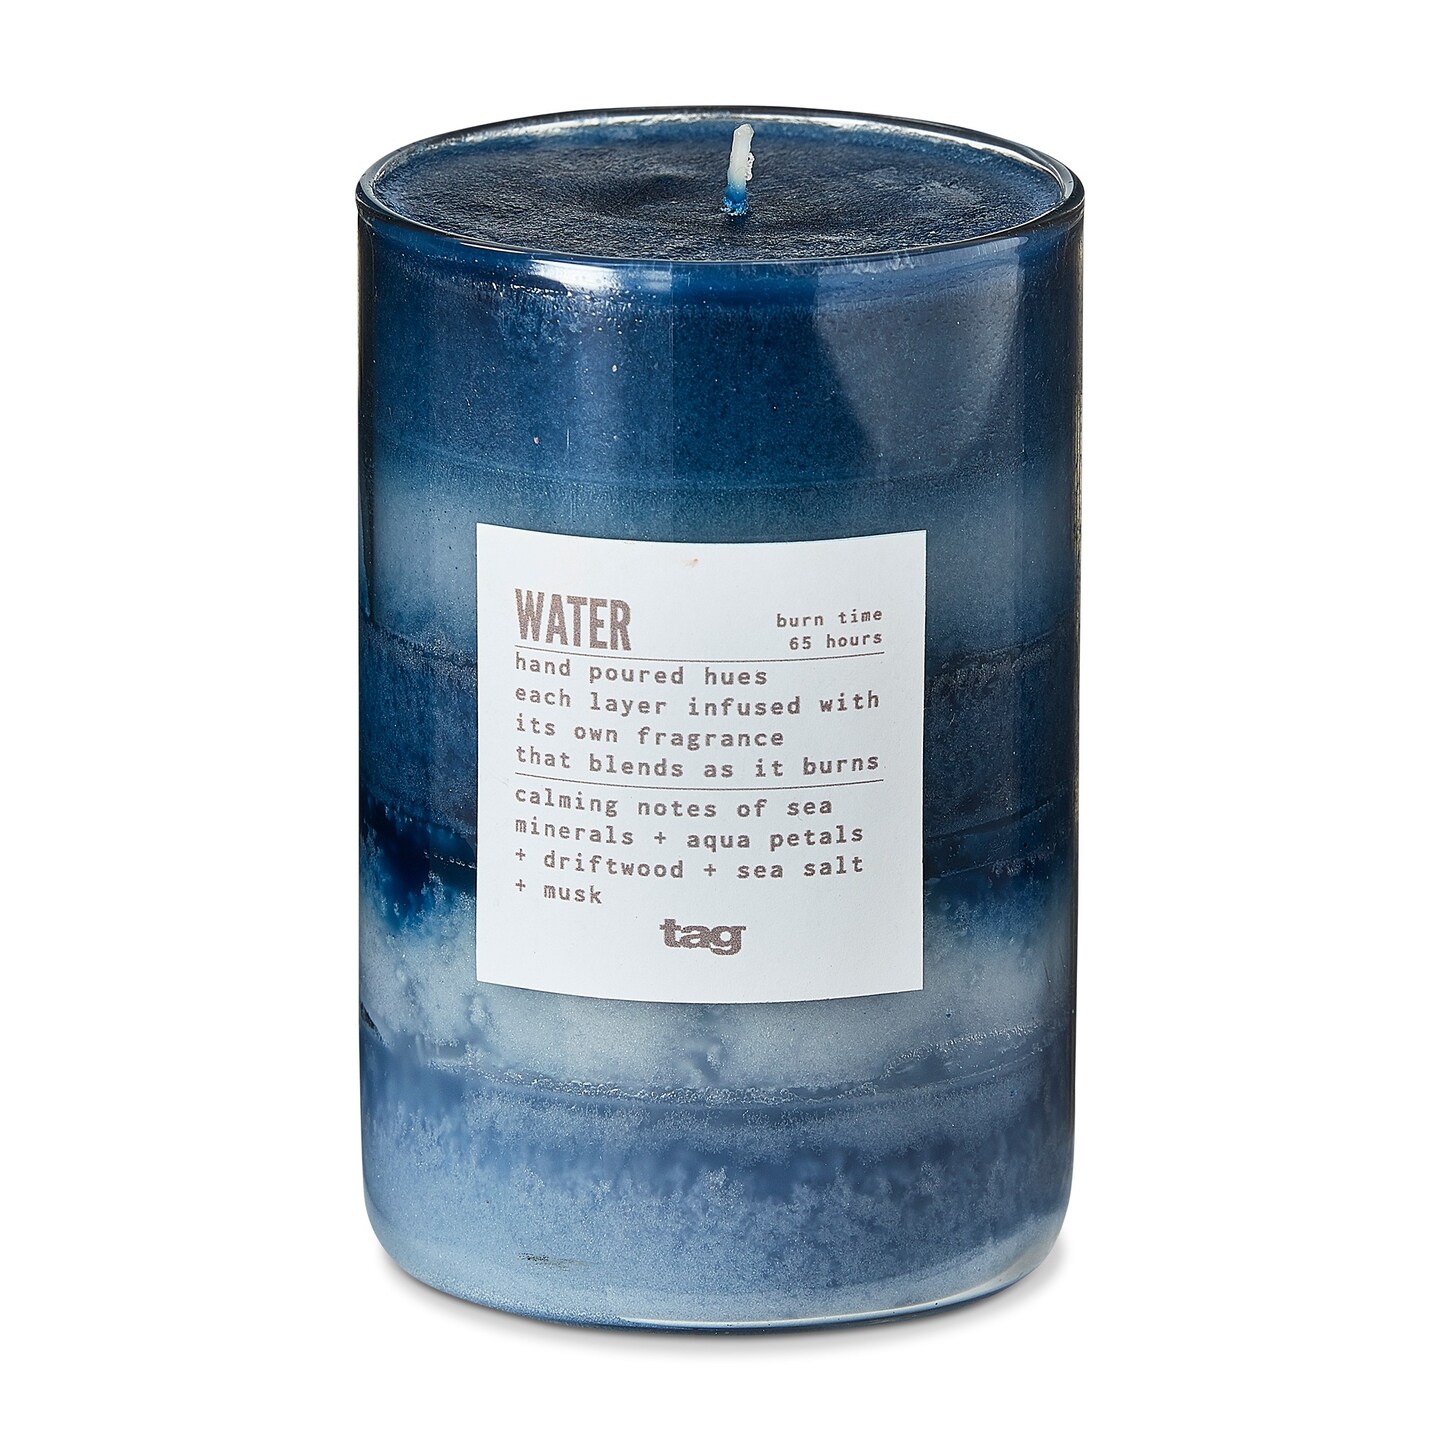 Water Themed Scented Paraffin Wax Pillar Candle Medium, Blue, 3x4.7 inch, Burn Time 85 Hours